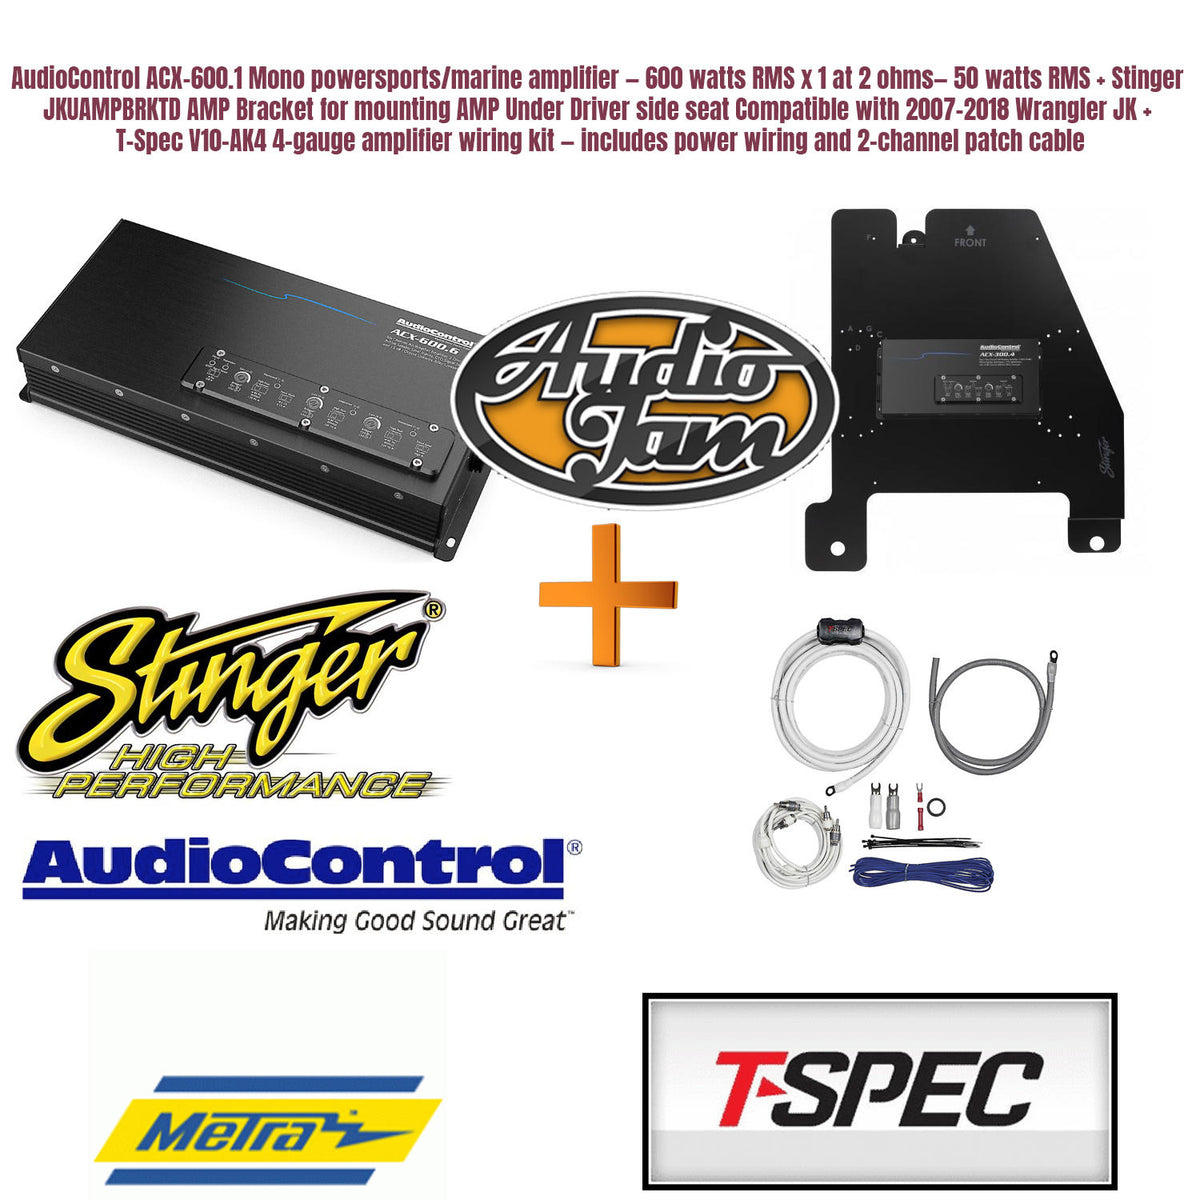 AudioControl ACX-600.1 Mono powersports/marine amplifier — 600 watts RMS x 1 at 2 ohms— 50 watts RMS + Stinger JKUAMPBRKTD AMP Bracket for mounting AMP Under Driver side seat Compatible with 2007-2018 Wrangler JK + T-Spec V10-AK4 4-gauge amplifier wiring